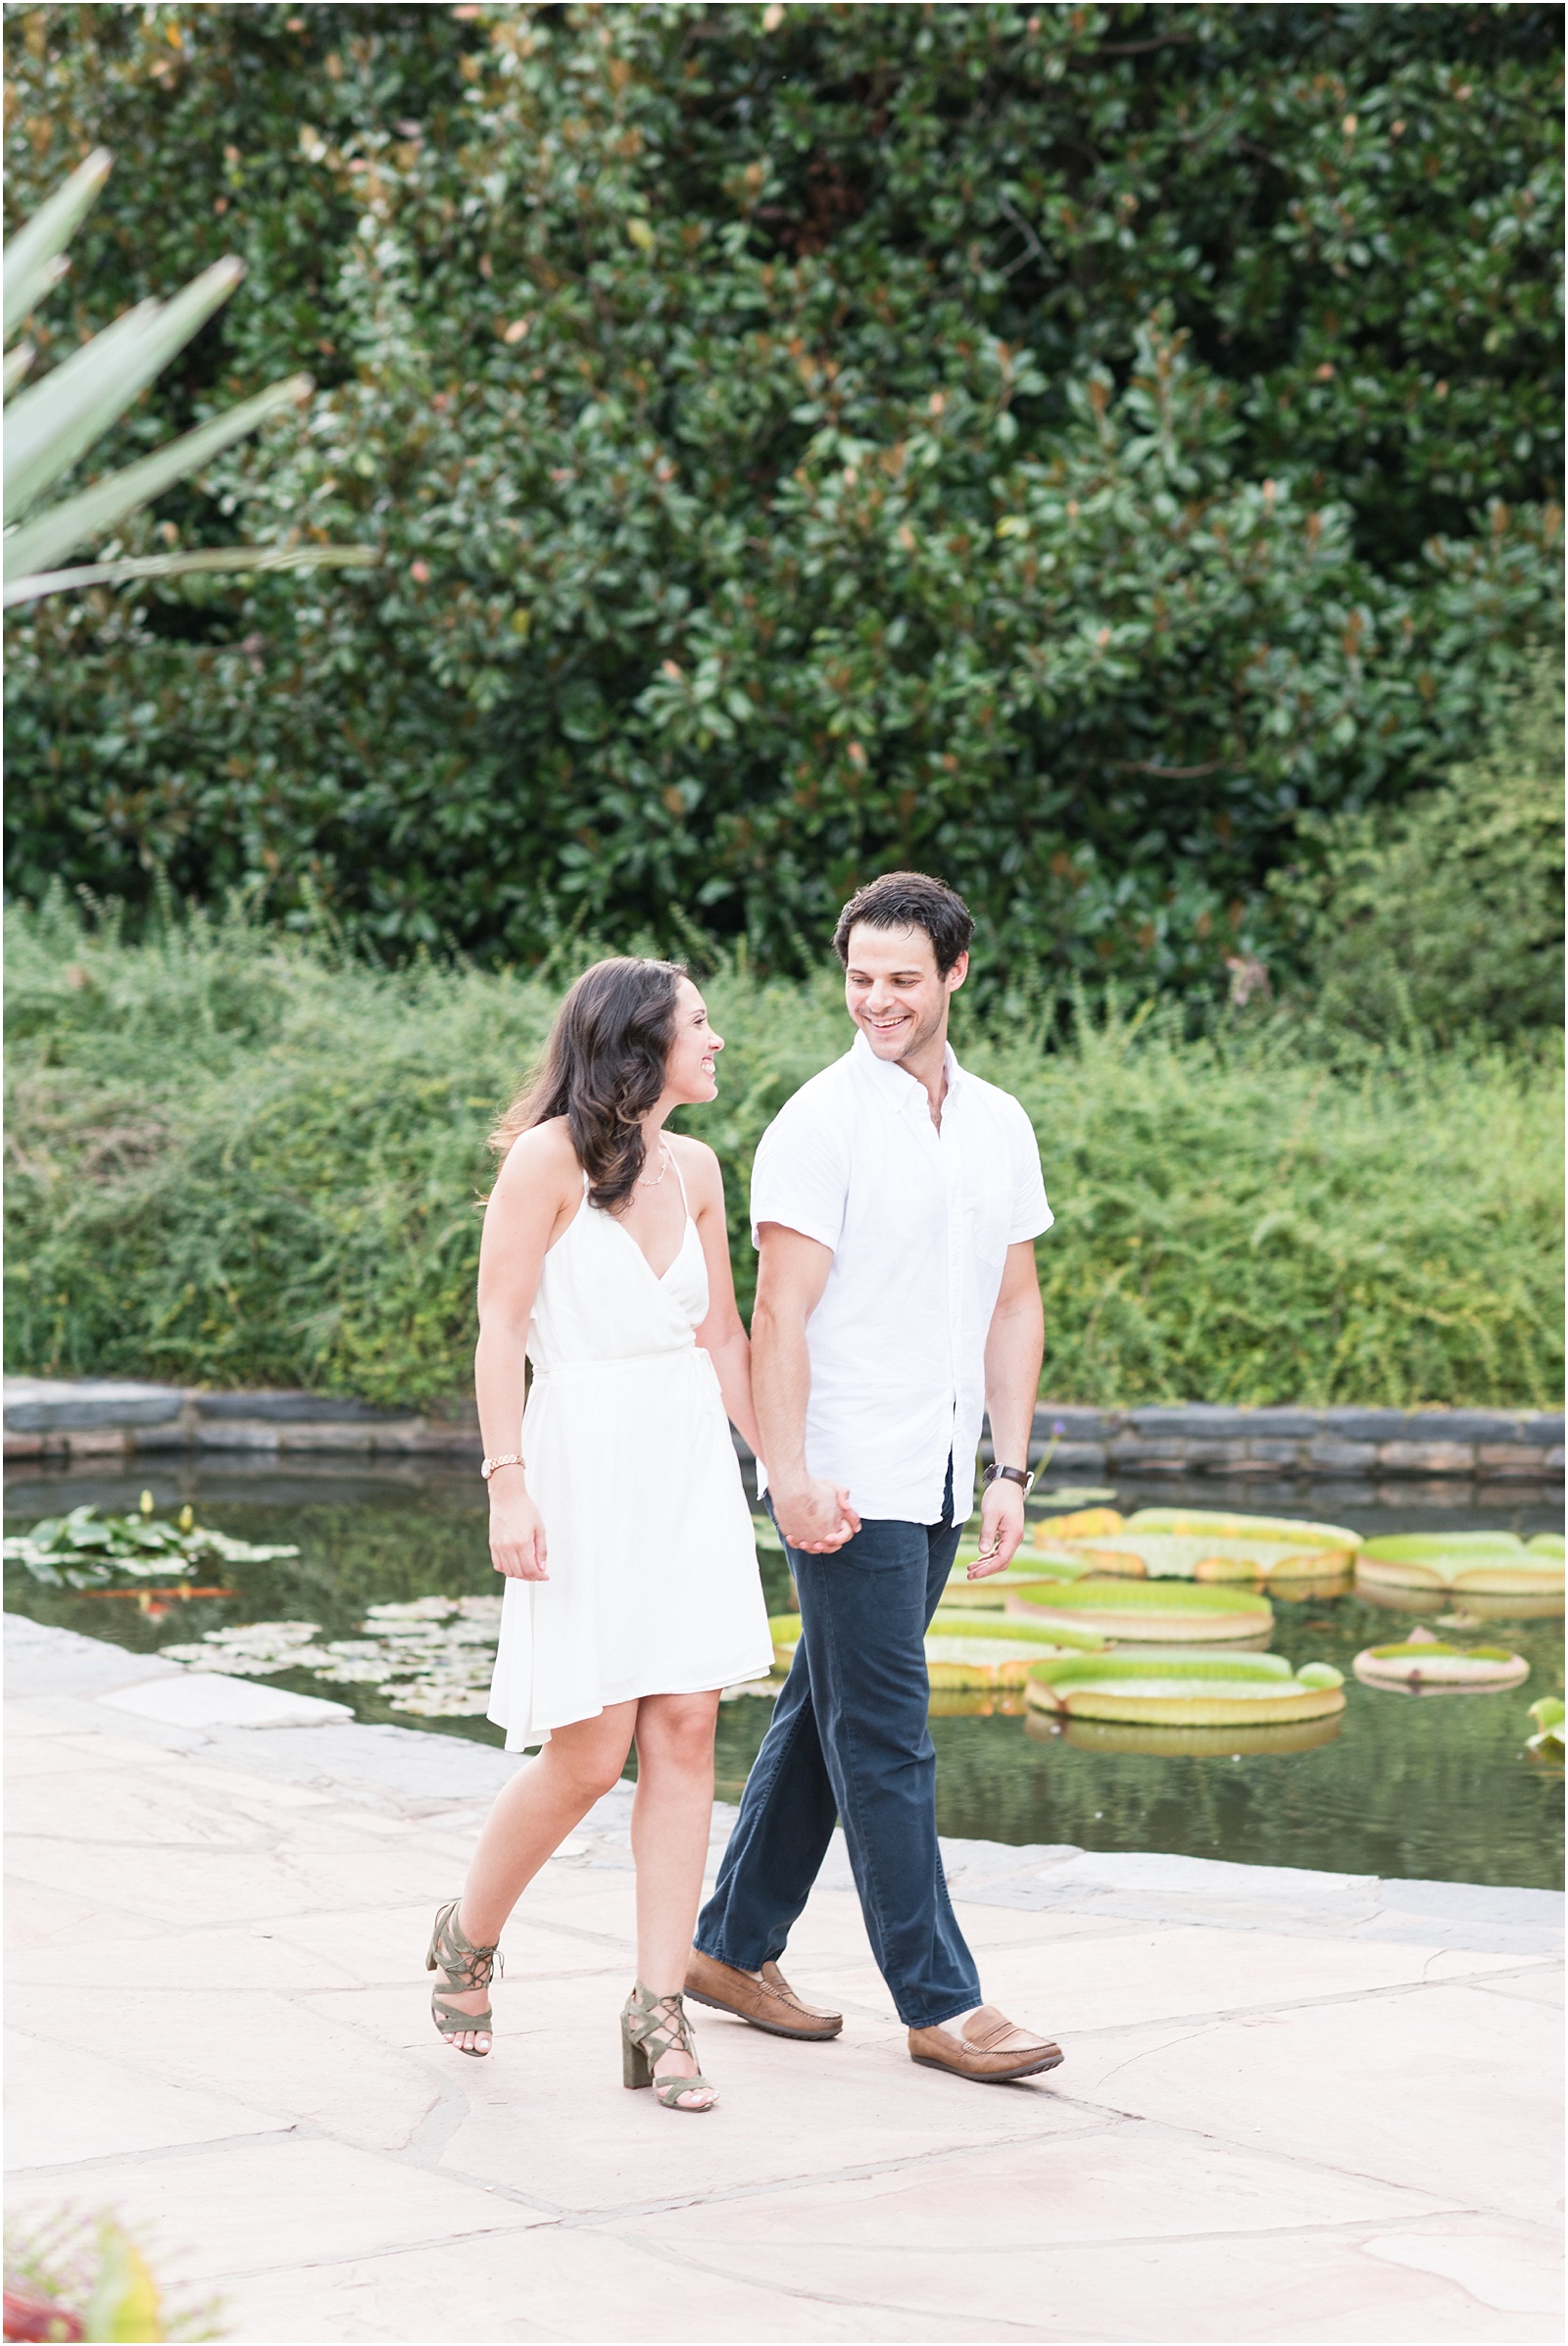 groom in white button up shirt and blue jeans walking hand in hand with bride wearing white dress walking in front of koi pond at Sarah P Duke Gardens